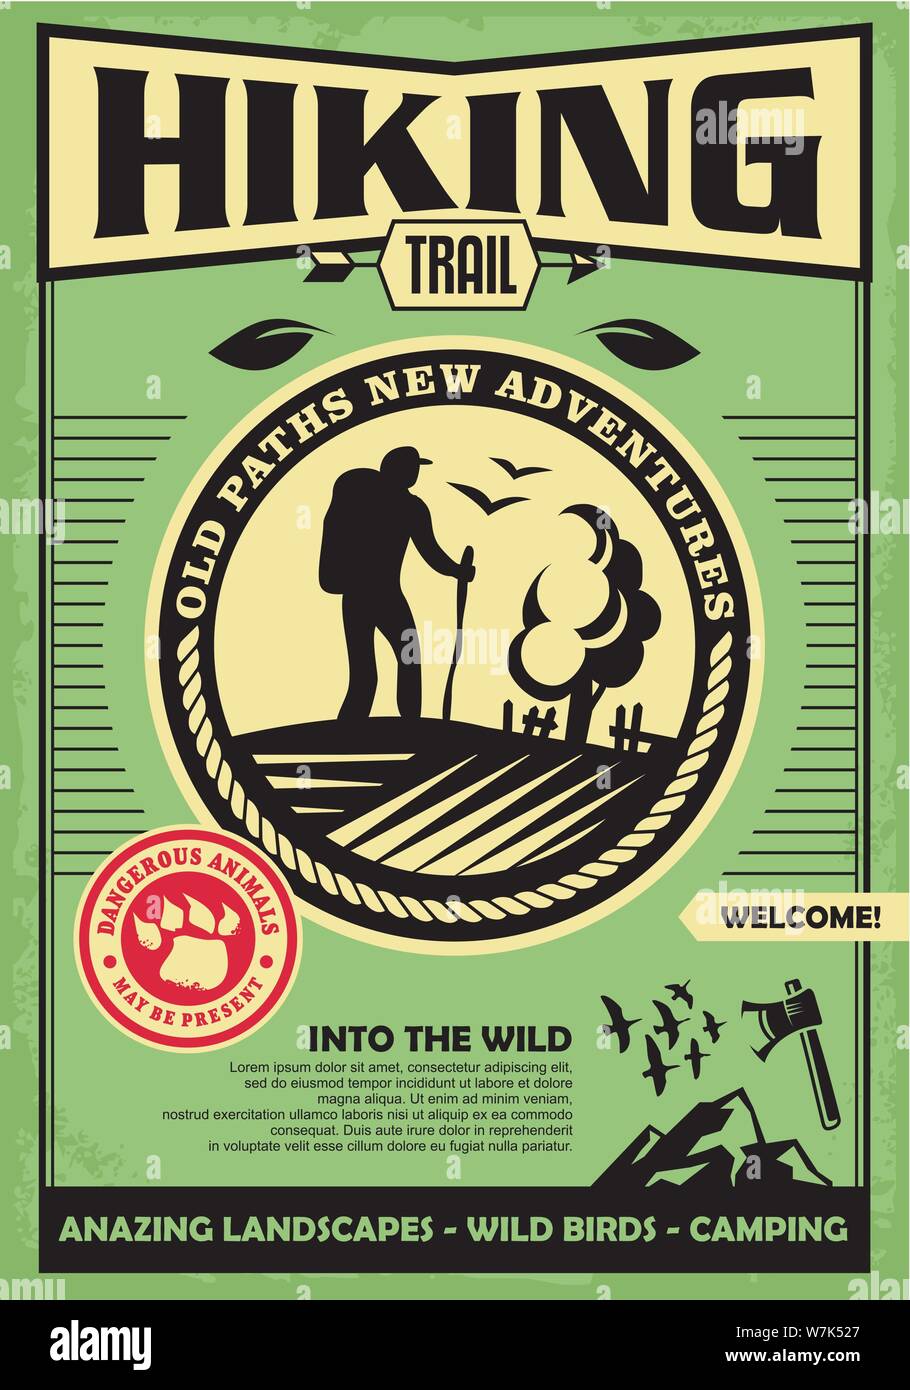 Hiking trail promotional retro poster design. Nature, wilderness and outdoor activities banner template. Stock Vector